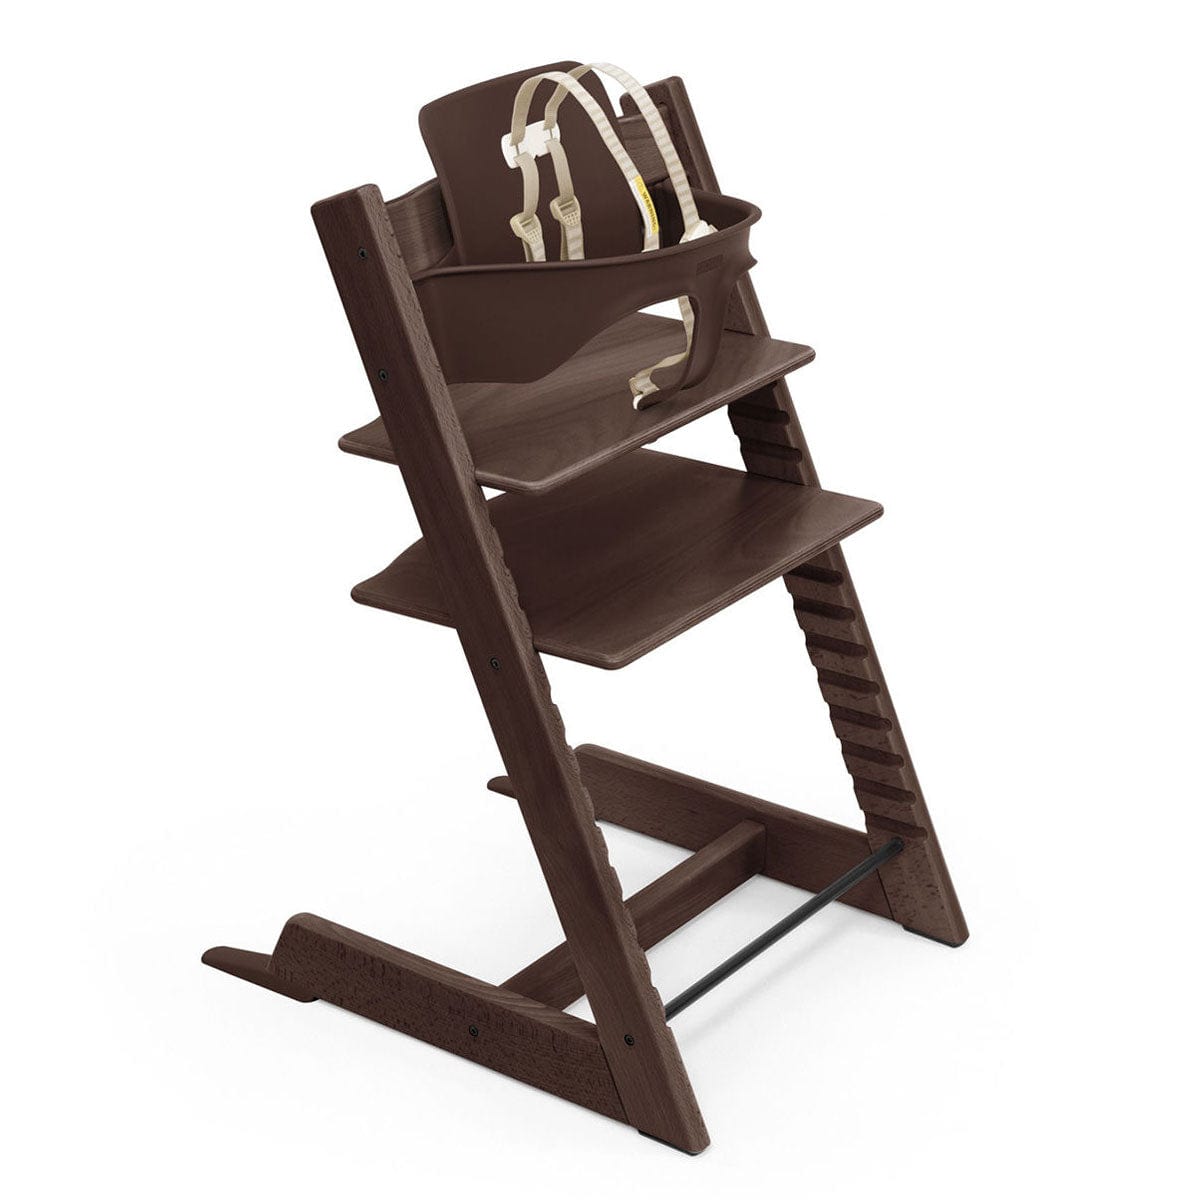 Stokke High Chairs & Booster Seats Walnut Stokke Tripp Trapp® High Chair Bundle